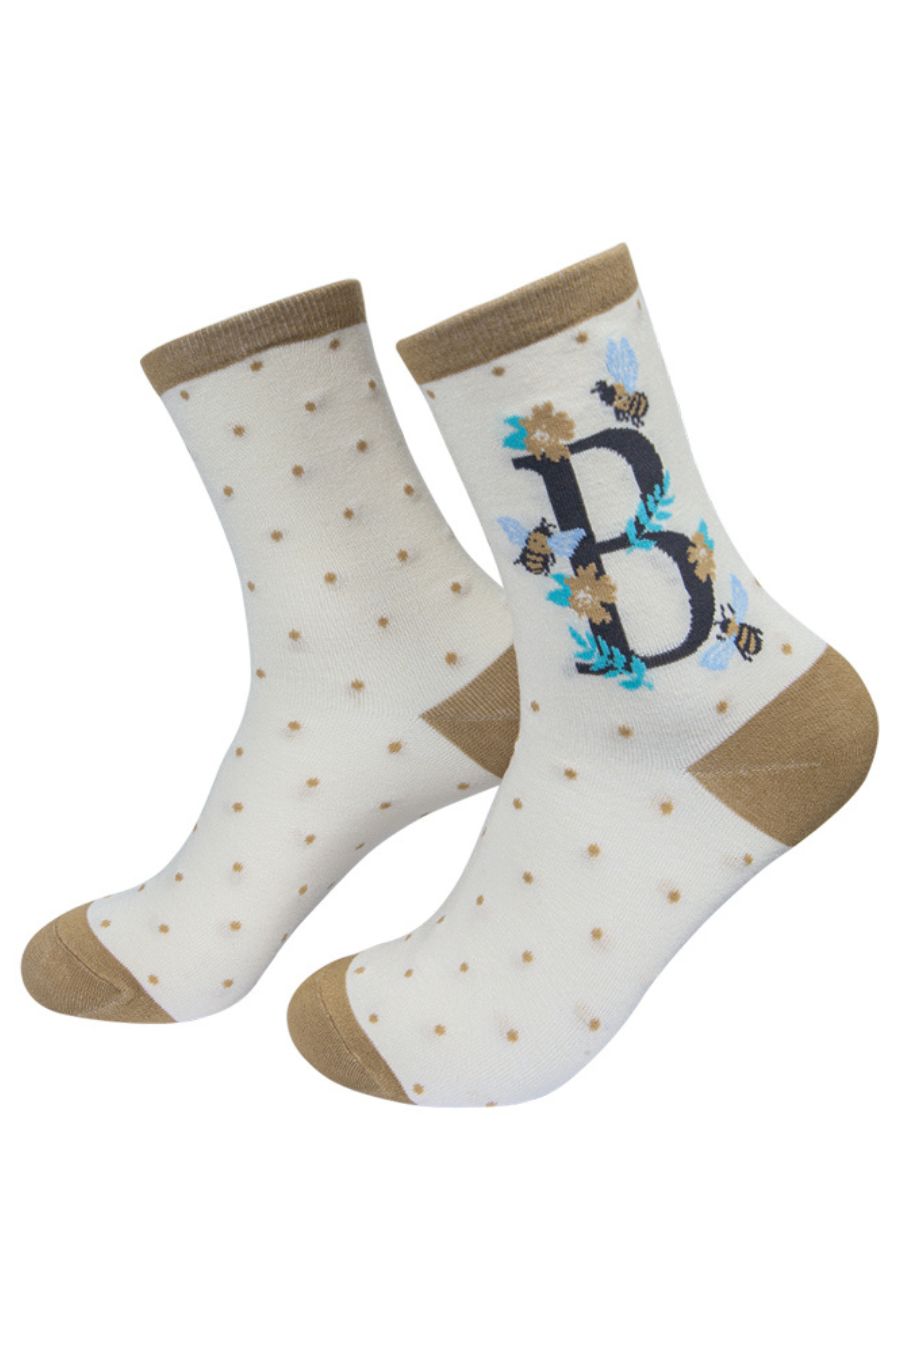 cream and gold ankle socks with a letter B and bumblebees